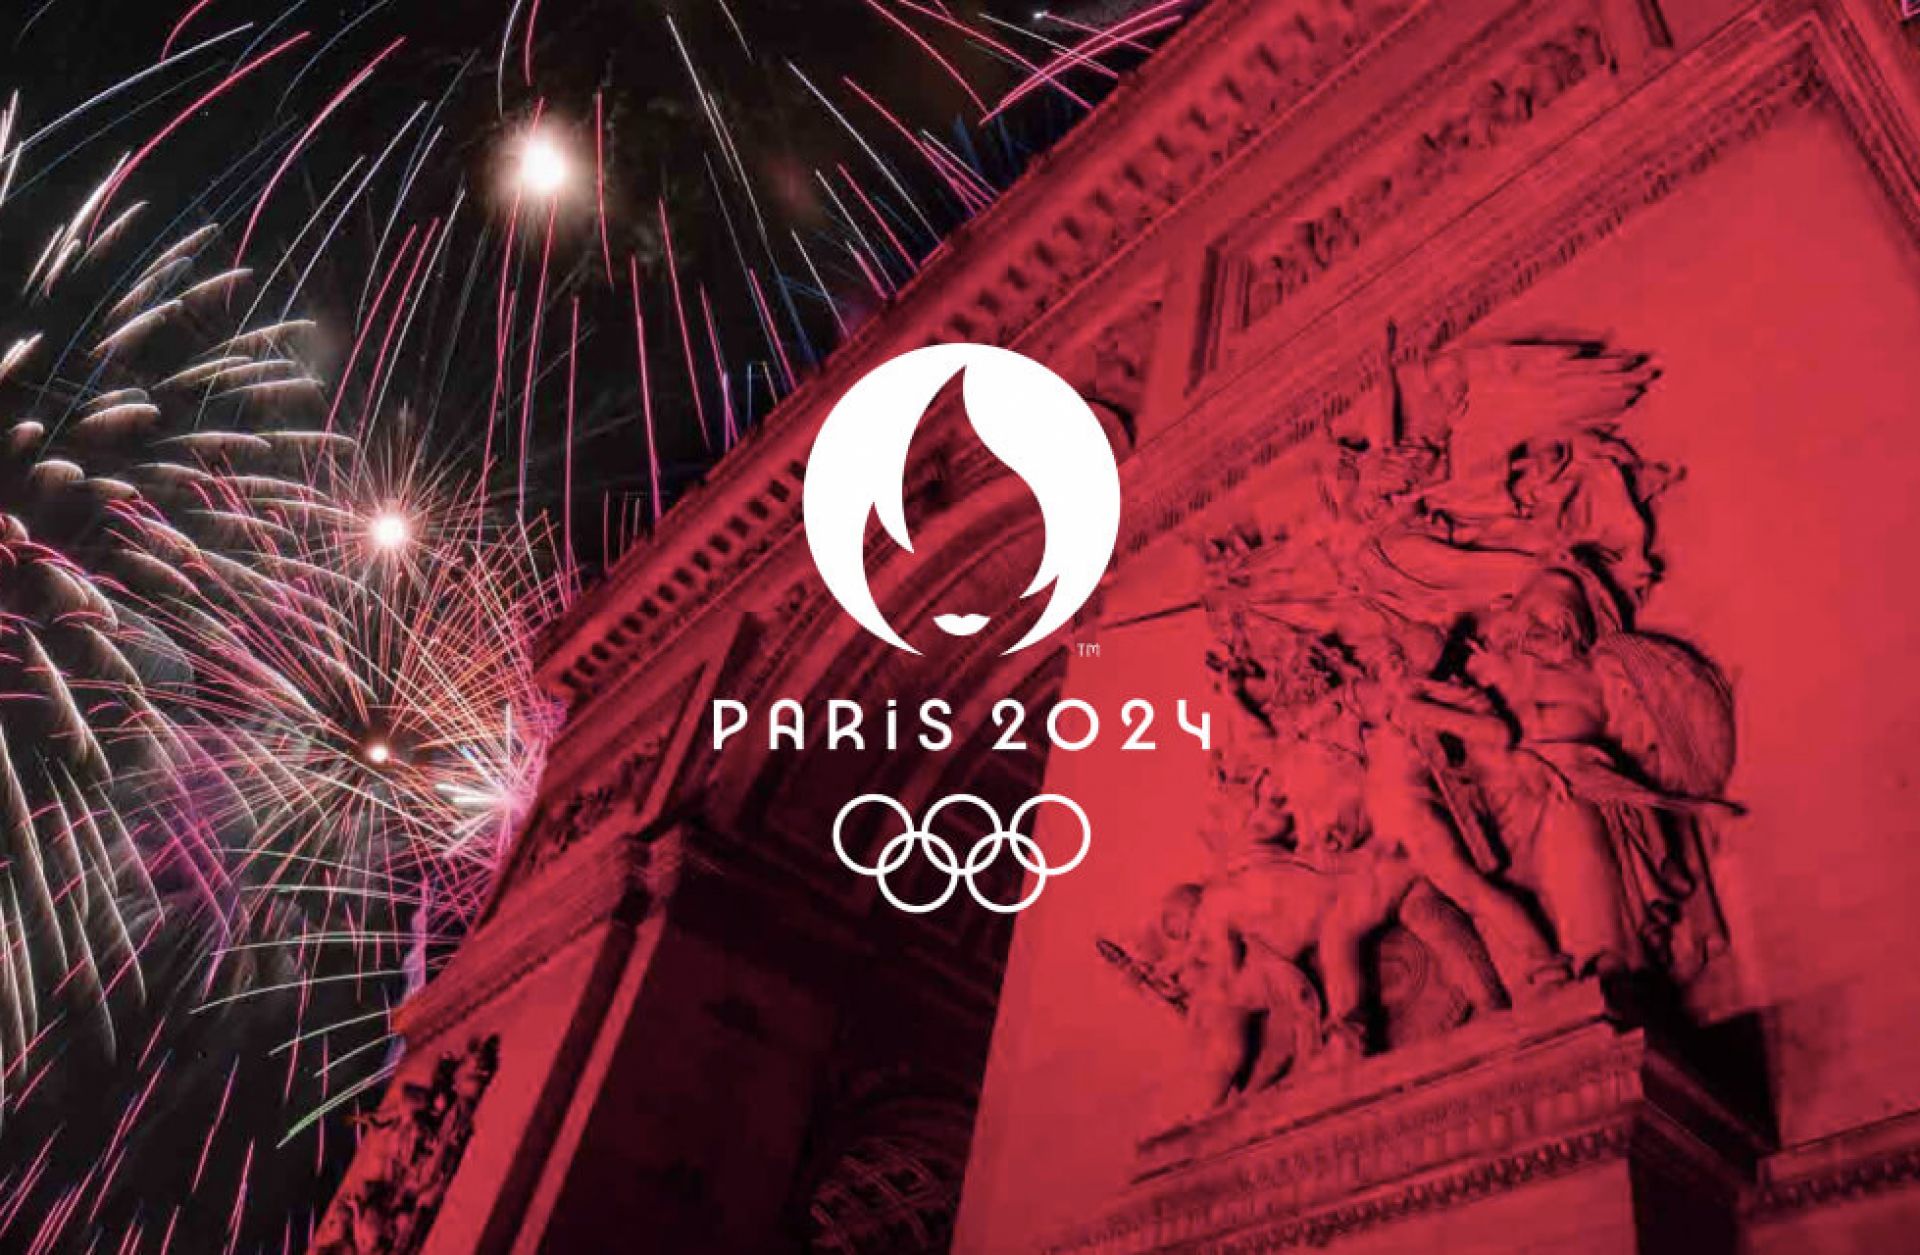 The 2024 Summer Olympic Games logo is superimposed on a photo of the Arc de Triomphe and fireworks in Paris, France.